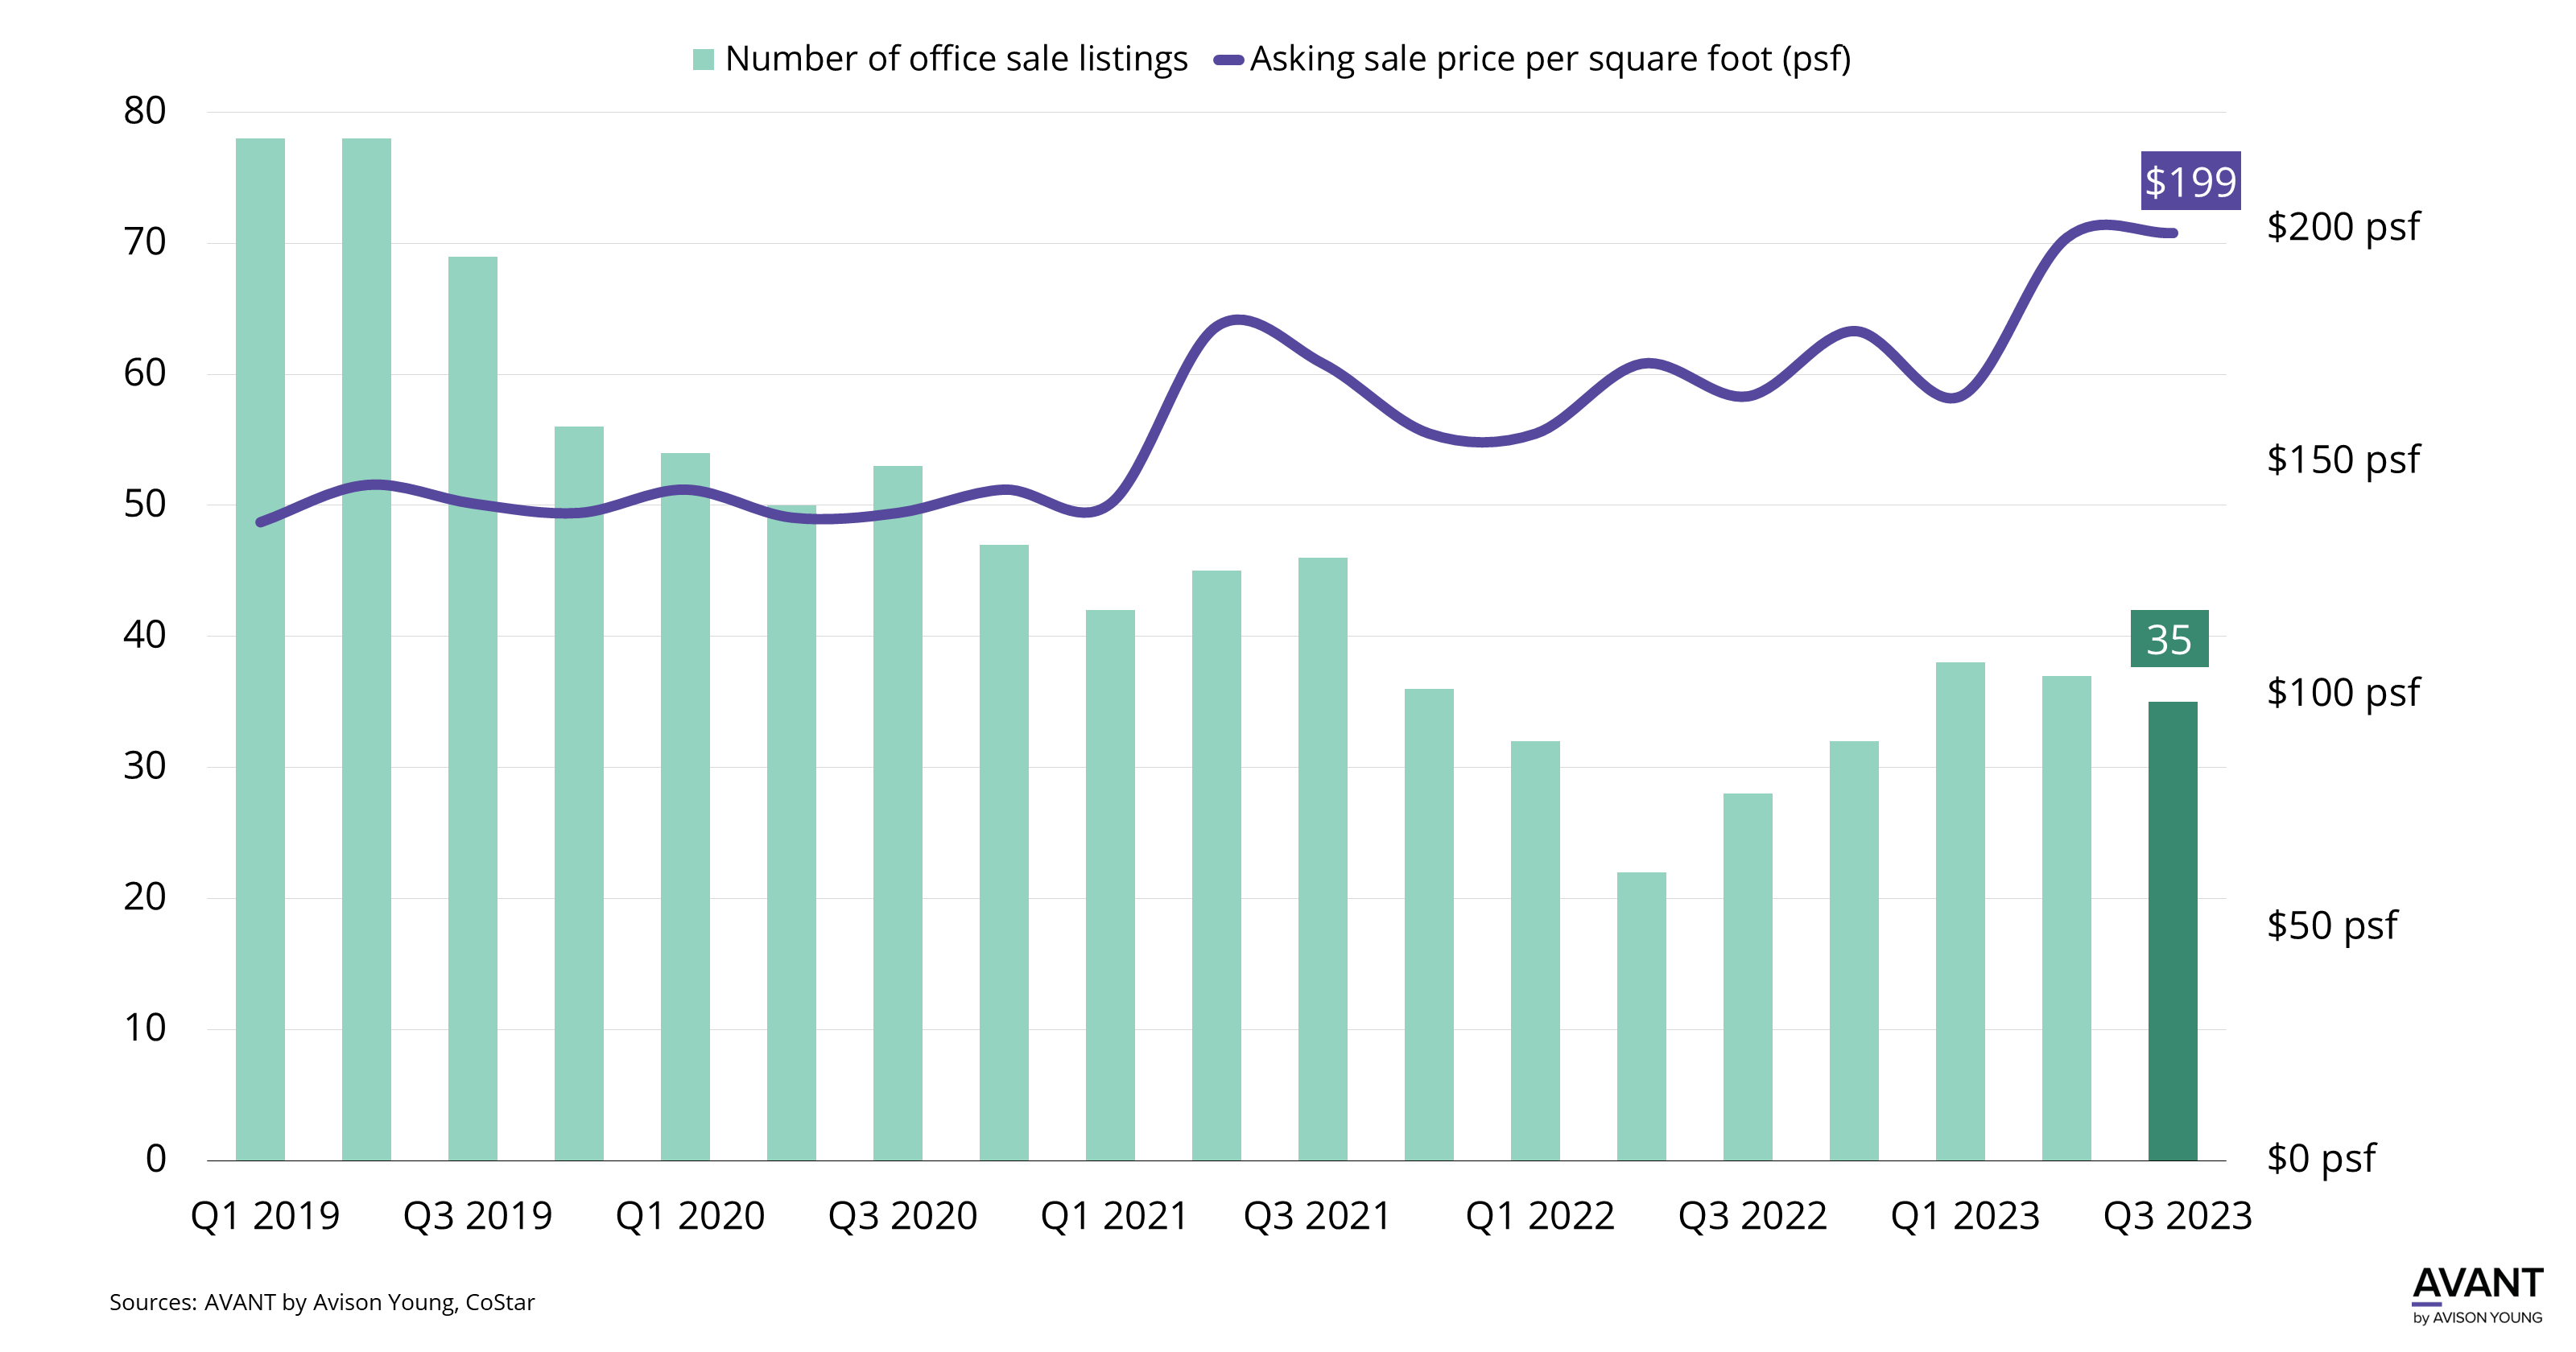 graph of the number of office sale listings compared to asking sale price per square foot from Q1 2019 to Q3 2023 in Tampa